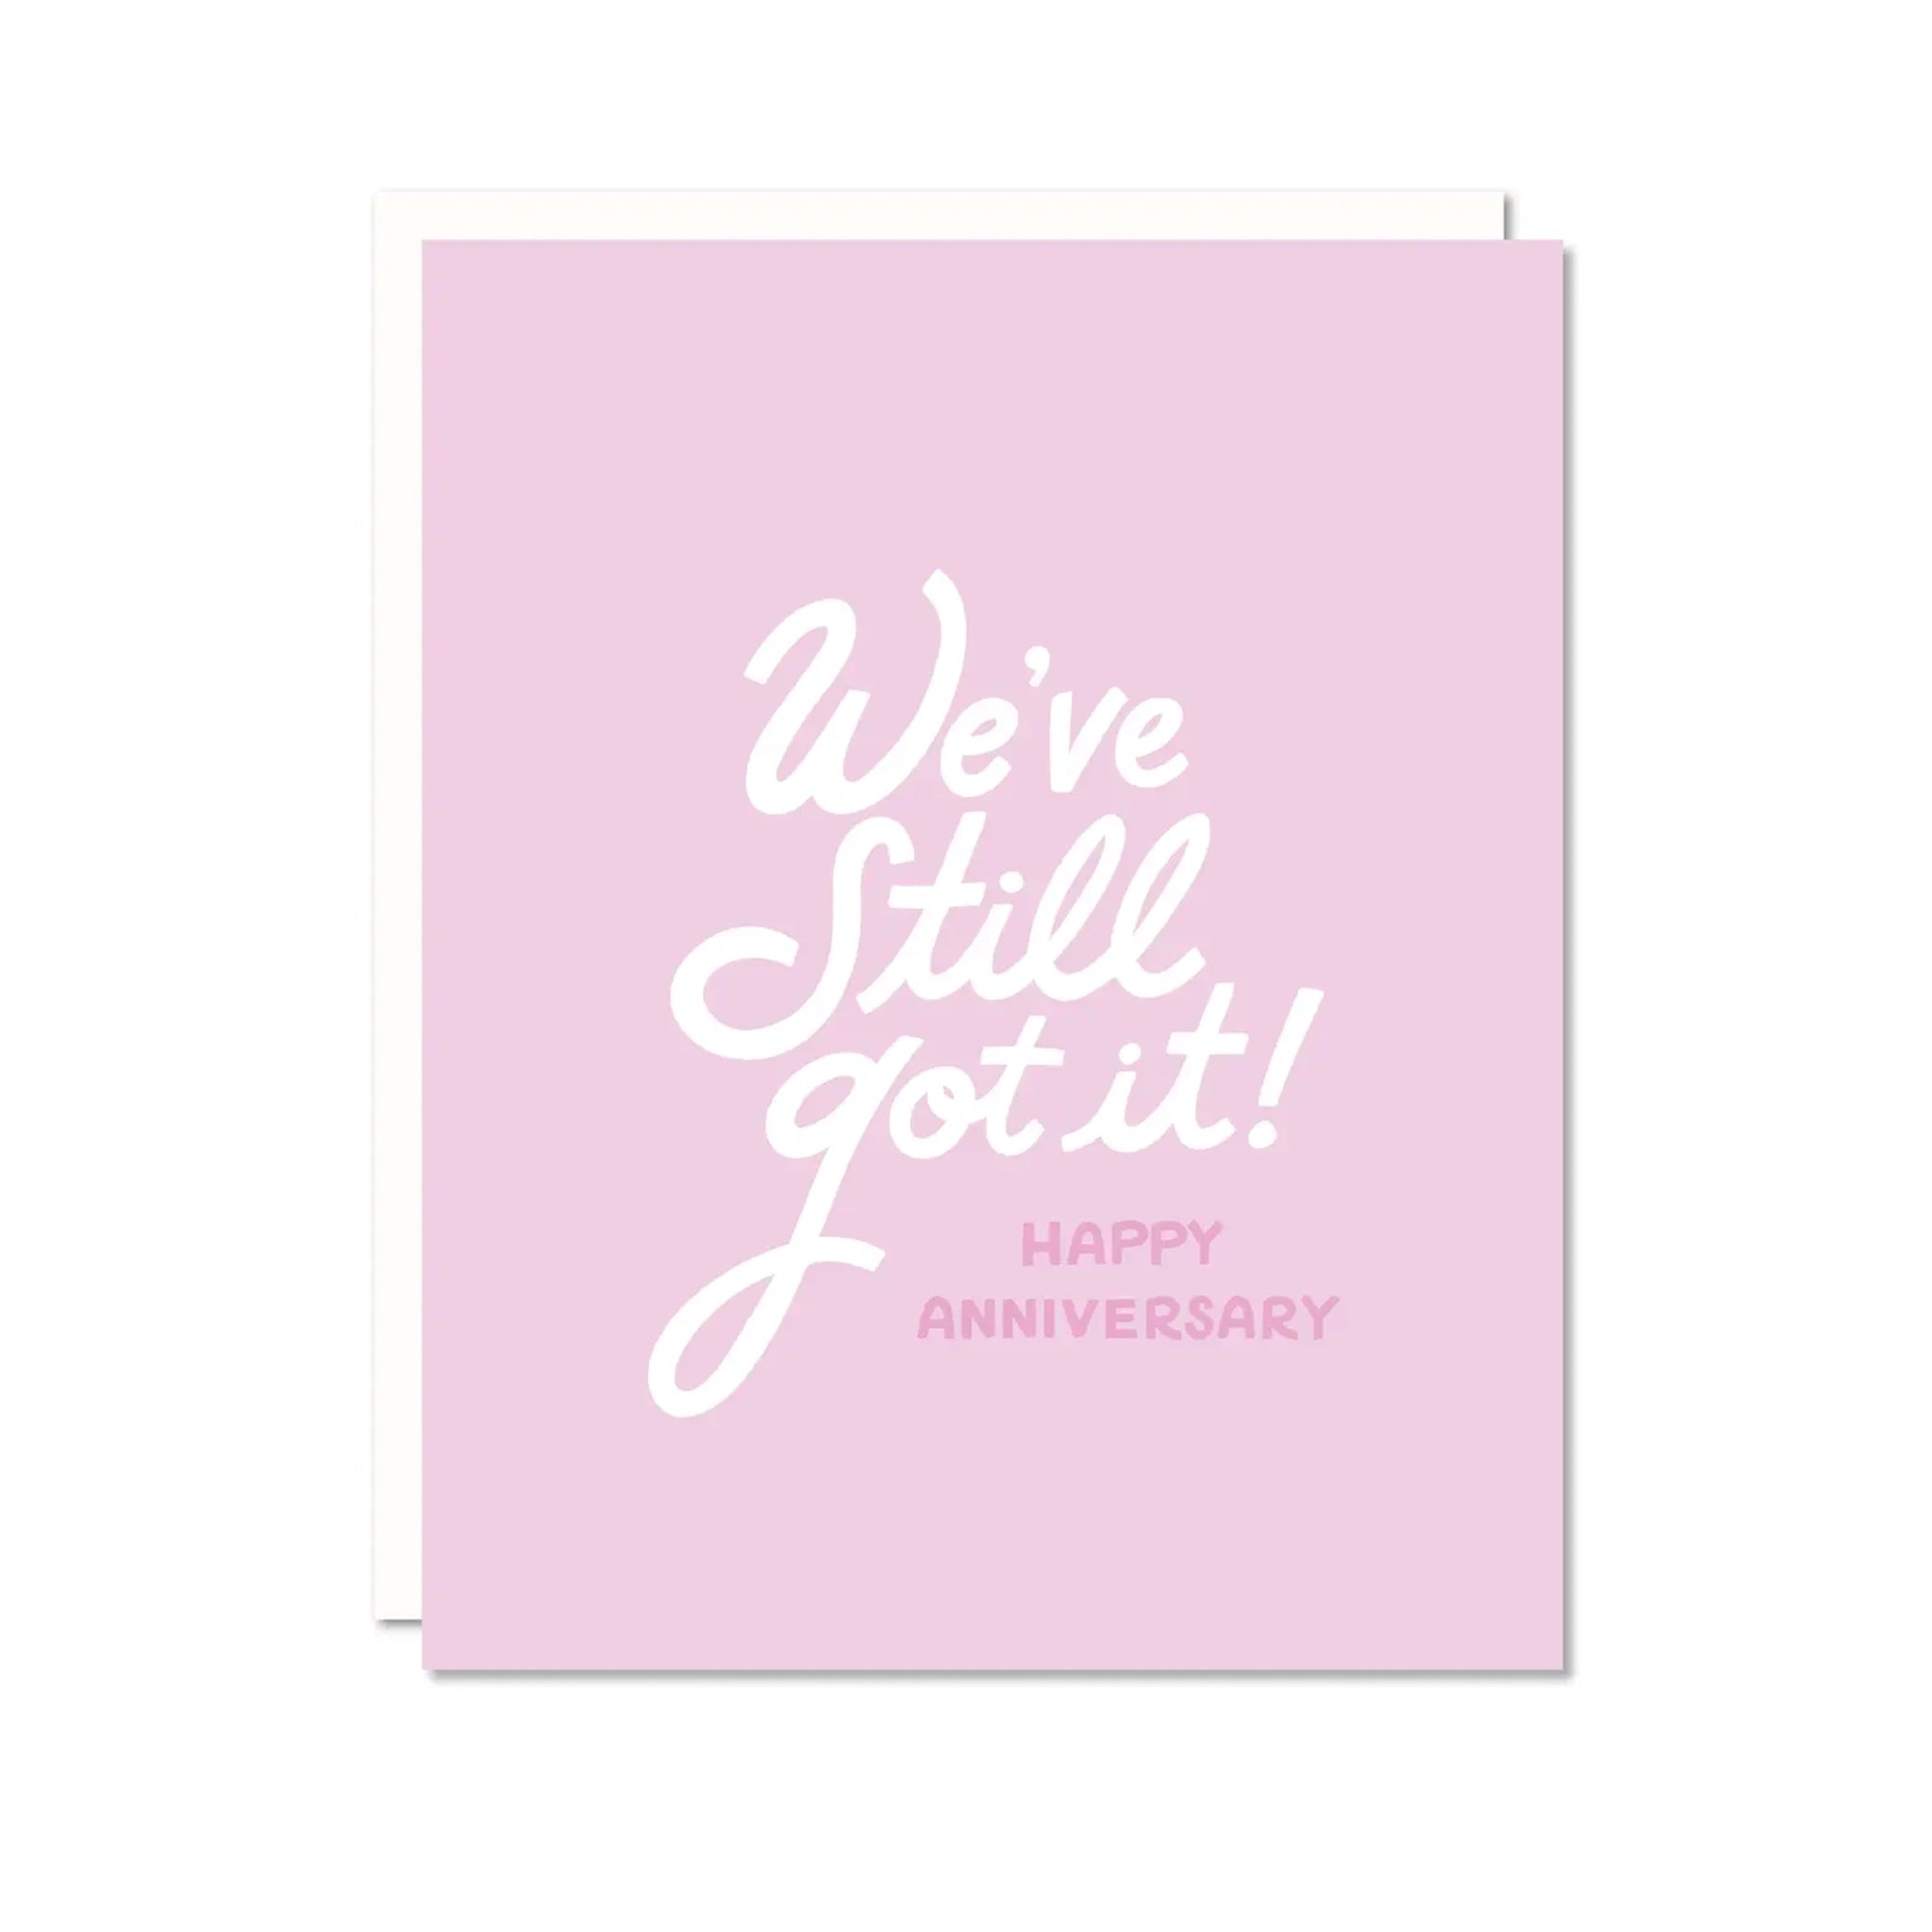 On a white background is a light pink card with white text that reads, "We've Still Got It! Happy Anniversary". 